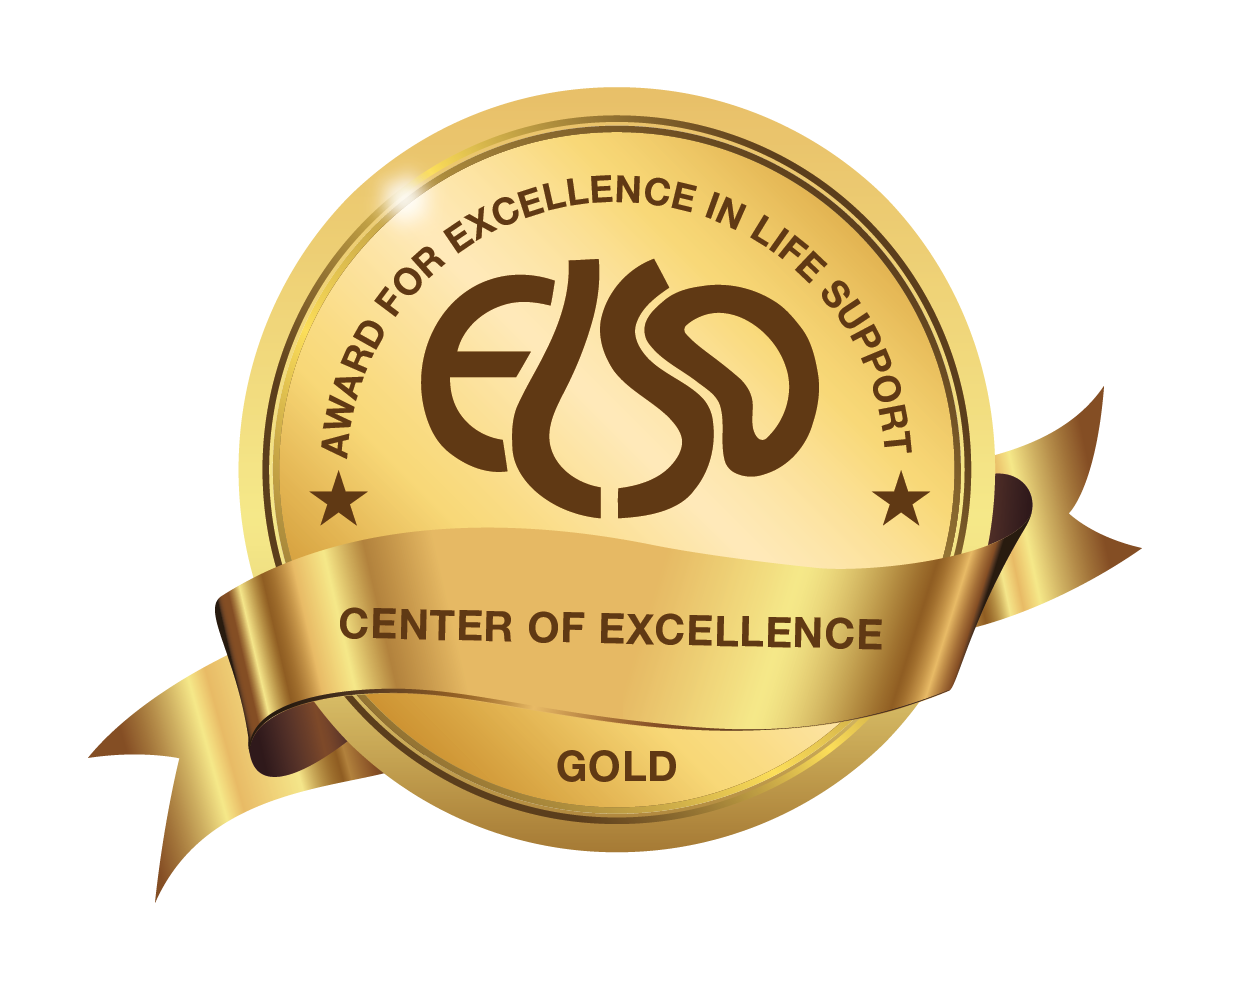 Extracorporeal Life Support Organization (ELSO) Award of Excellence